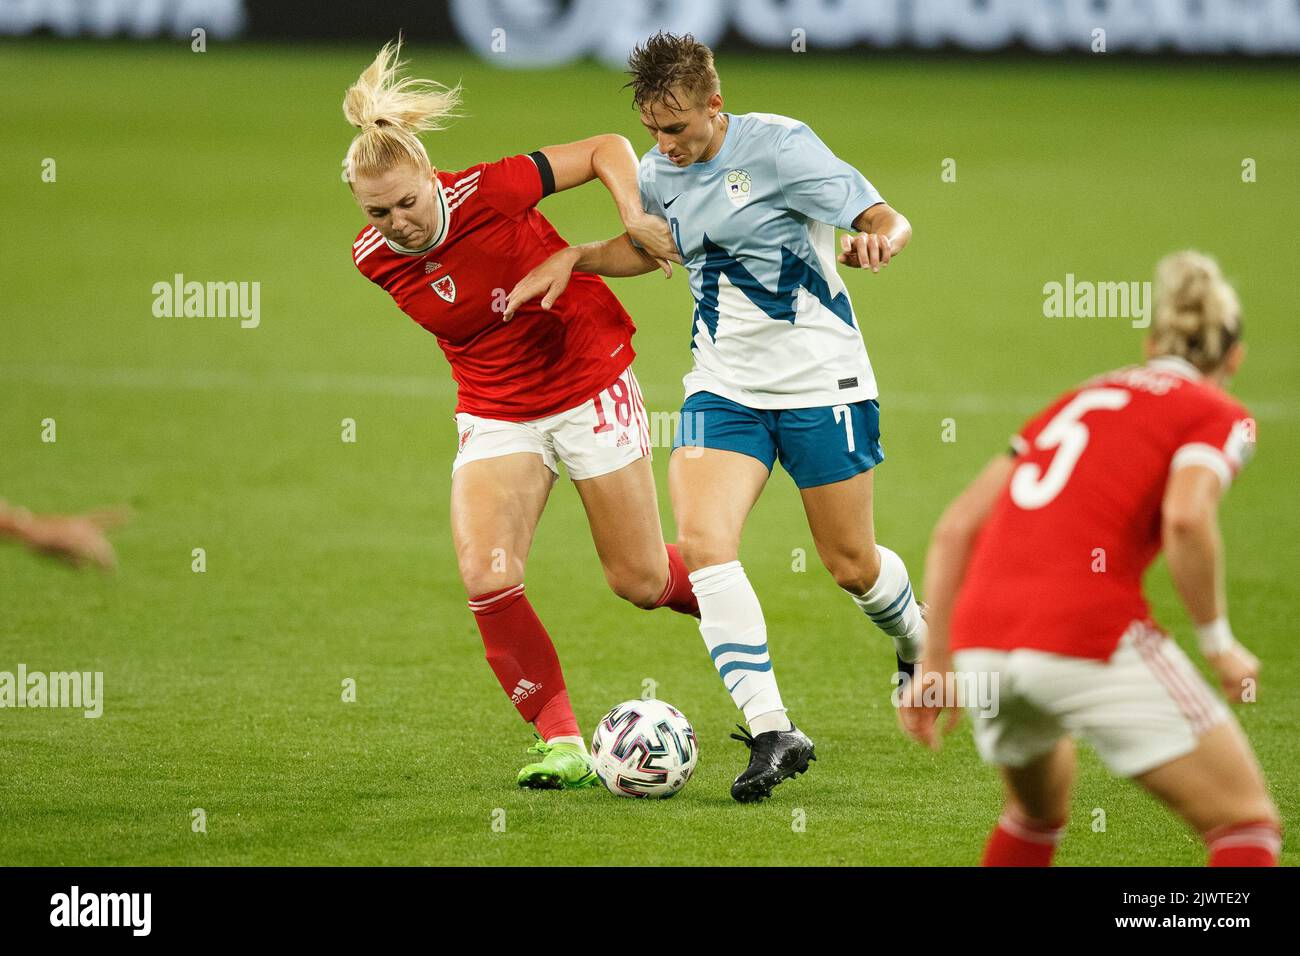 Cardiff, UK. 6th Sep, 2022. Ceri Holland of Wales and Kristina Erman of Slovenia during the Wales v Slovenia Women's World Cup Qualification match. Credit: Gruffydd Thomas/Alamy Live News Stock Photo